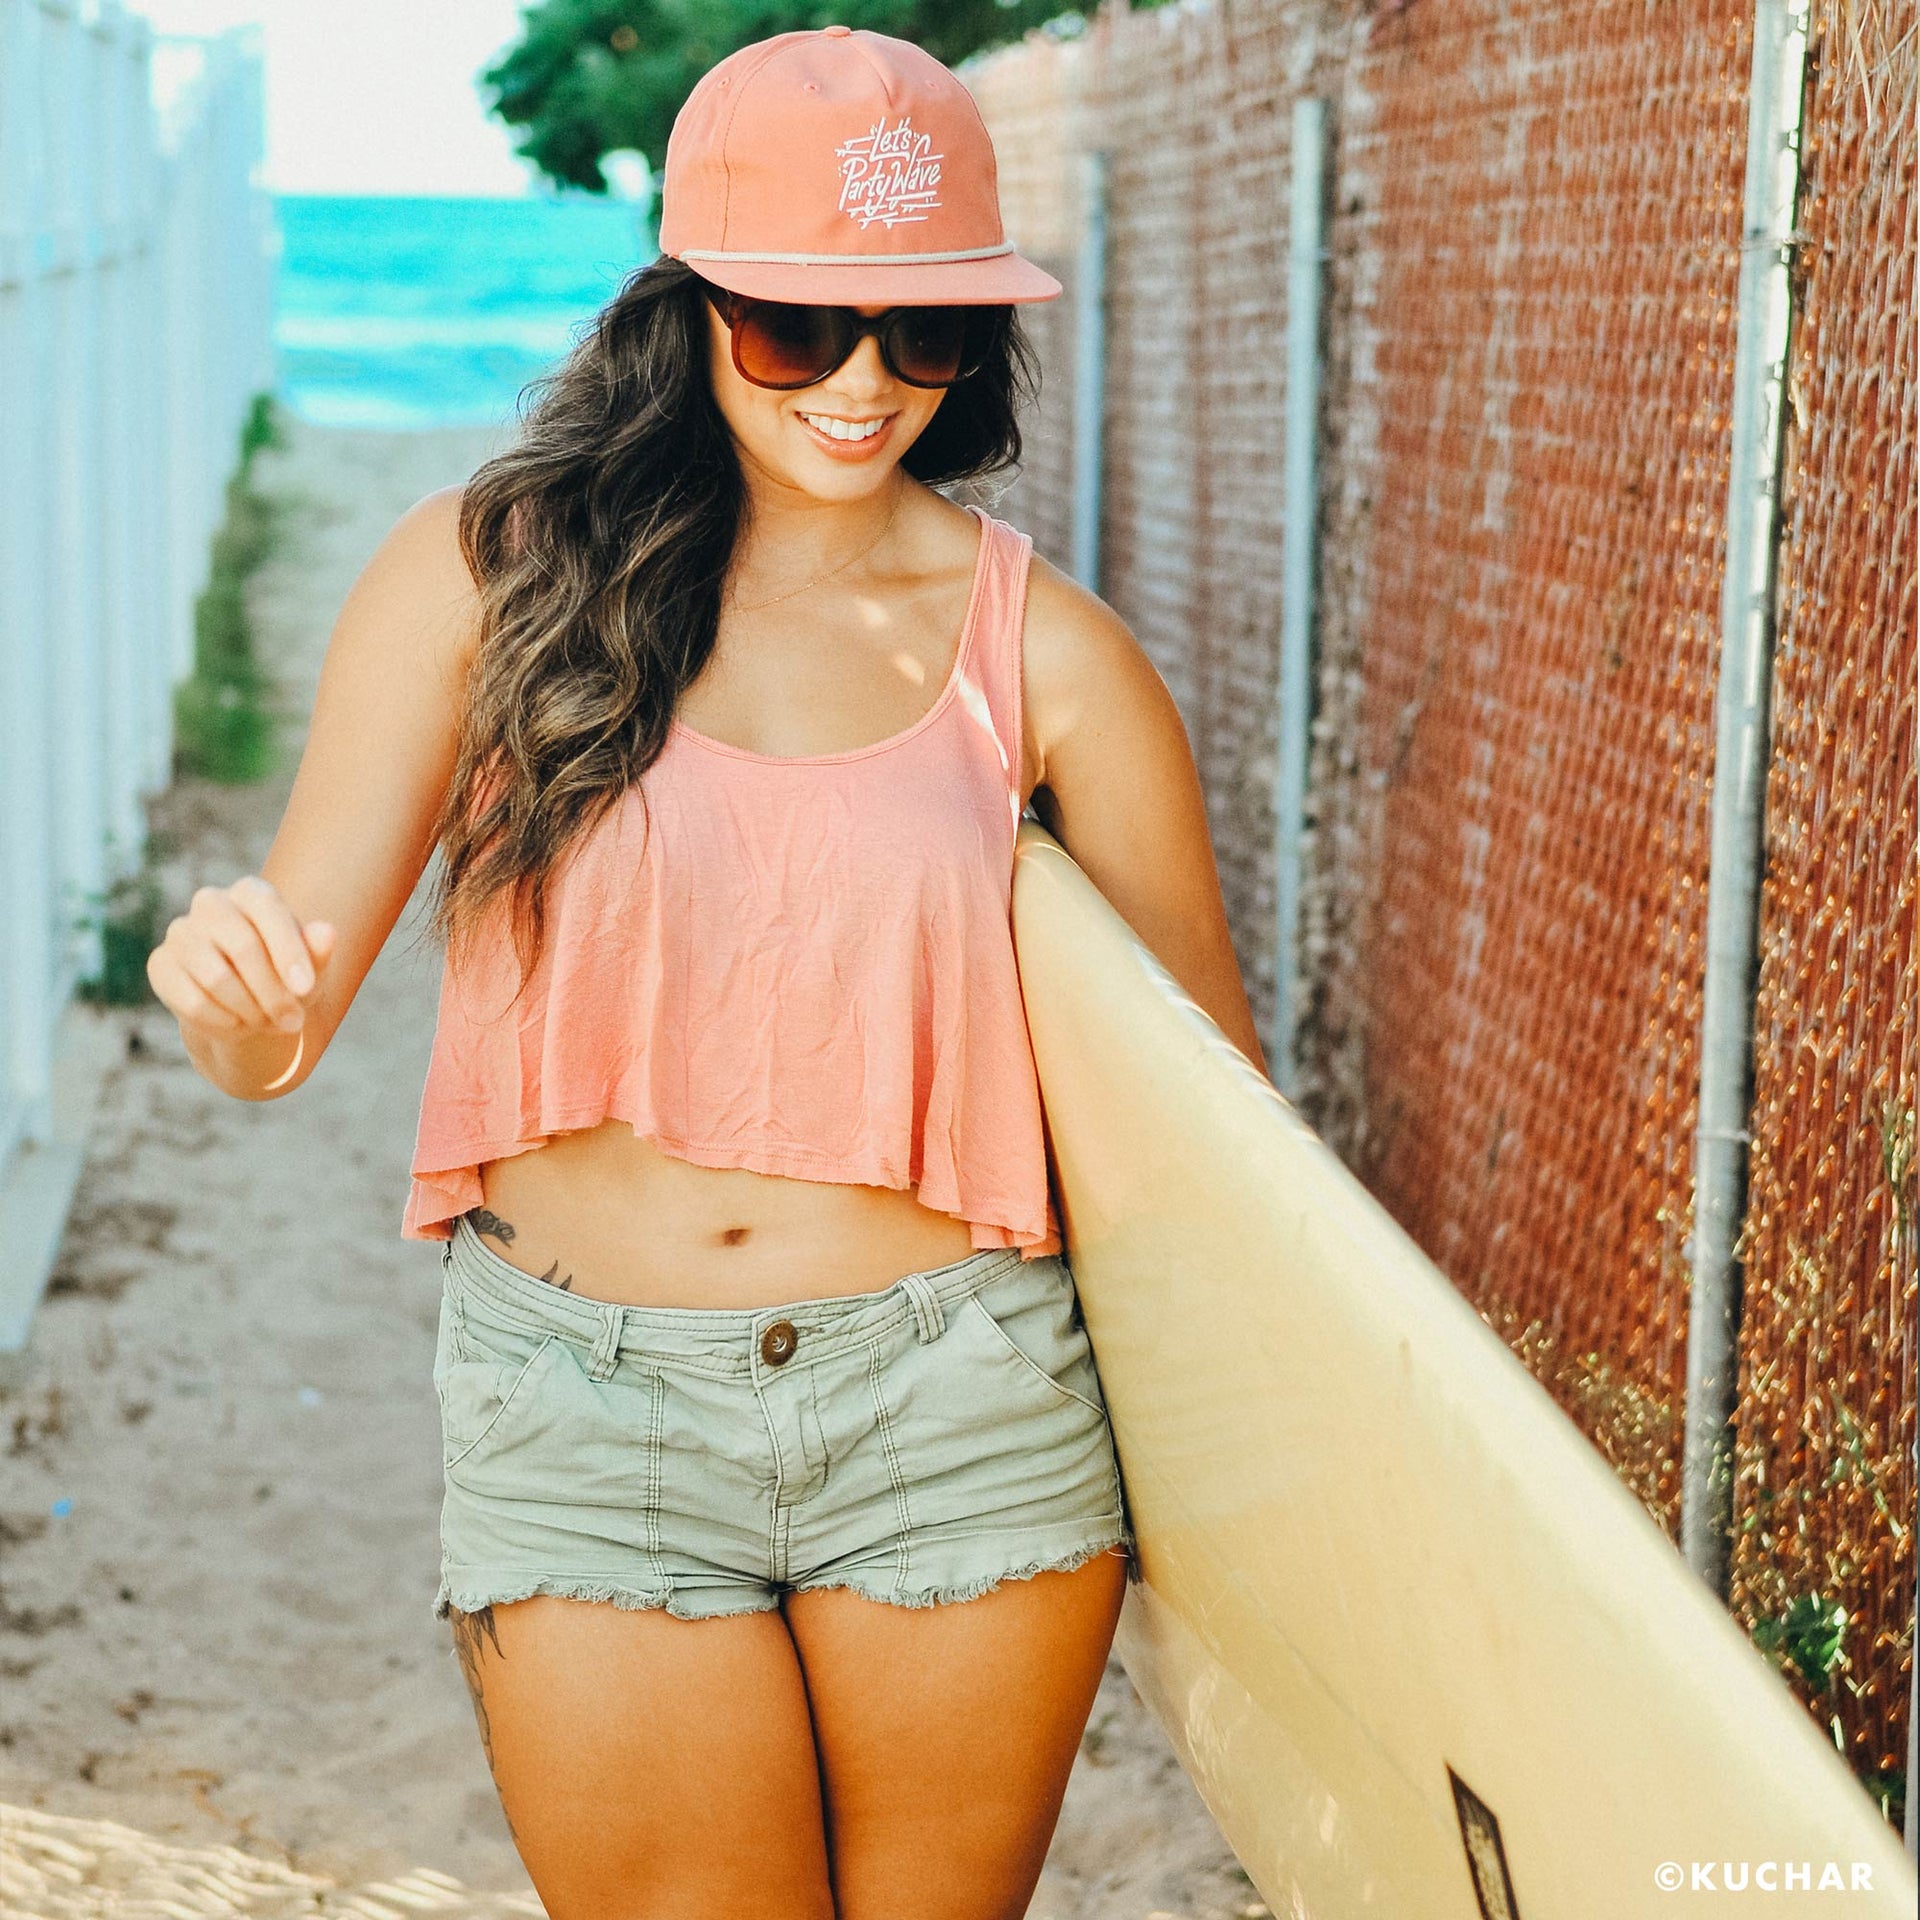 let's party wave snapback hat with corduroy sunset